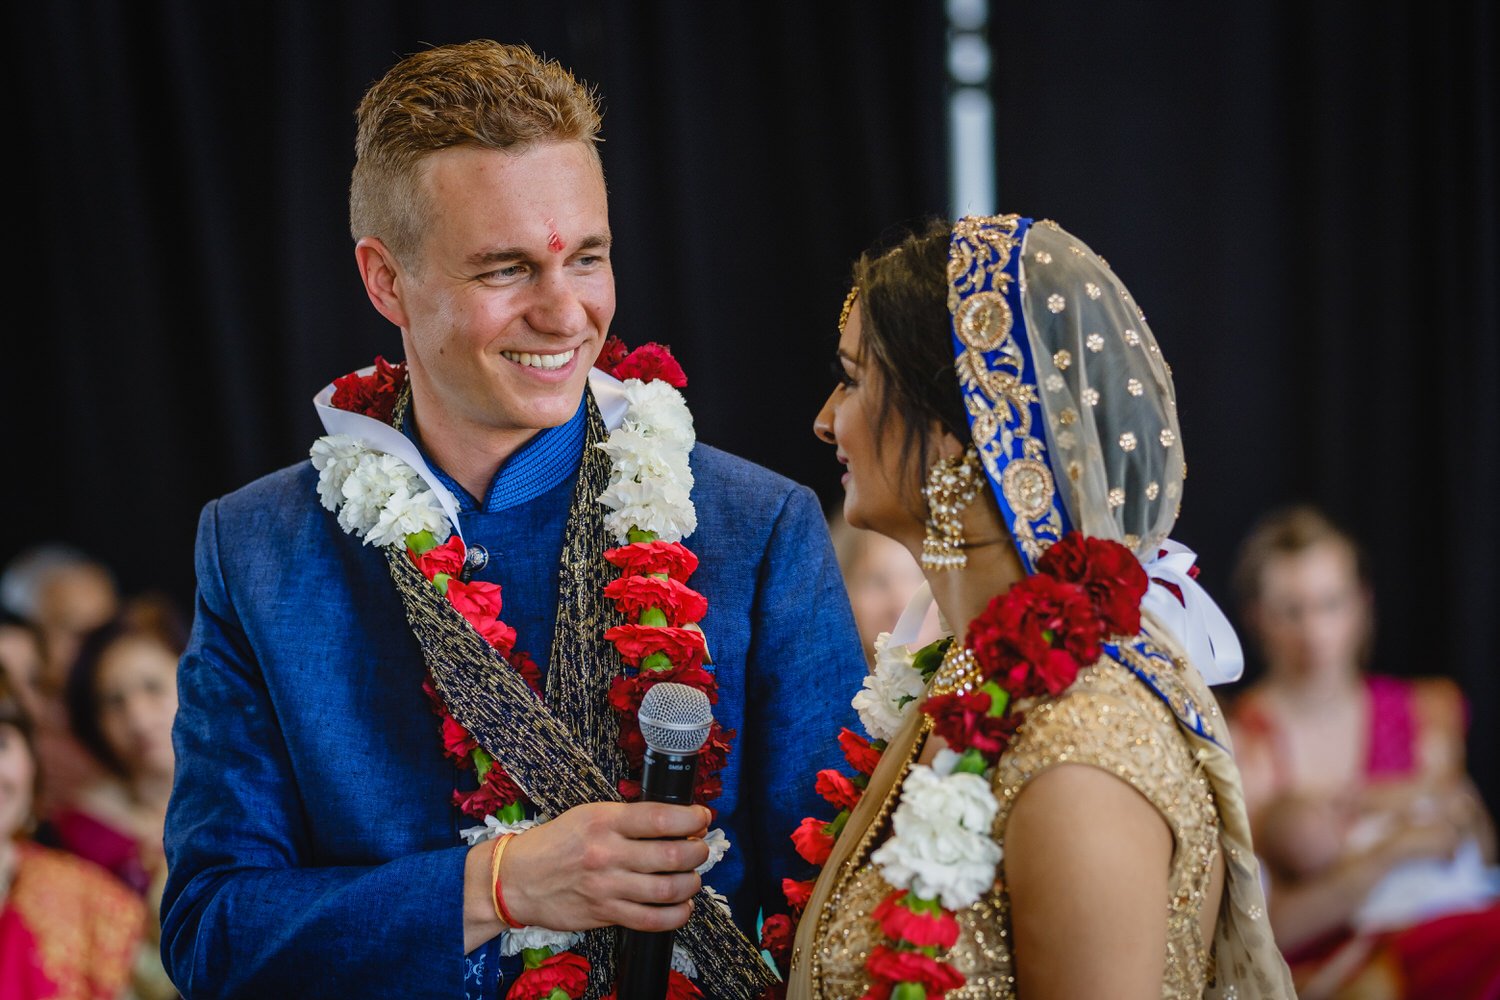 indian wedding ceremony at the horticulture building at Landsdowne park in ottawa